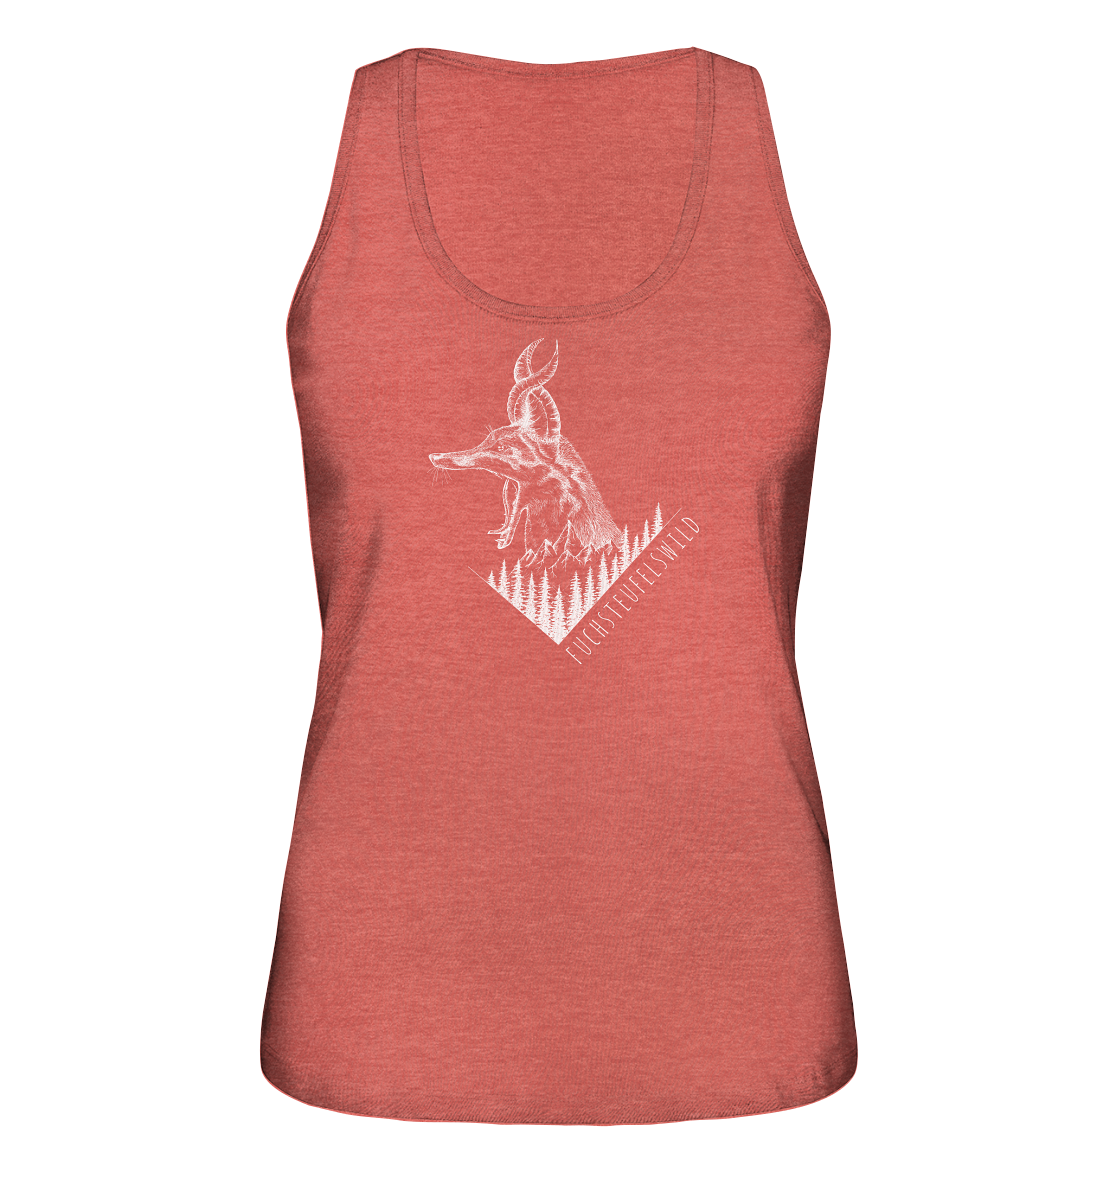 front-ladies-organic-tank-top-e05651-1116x-27.png